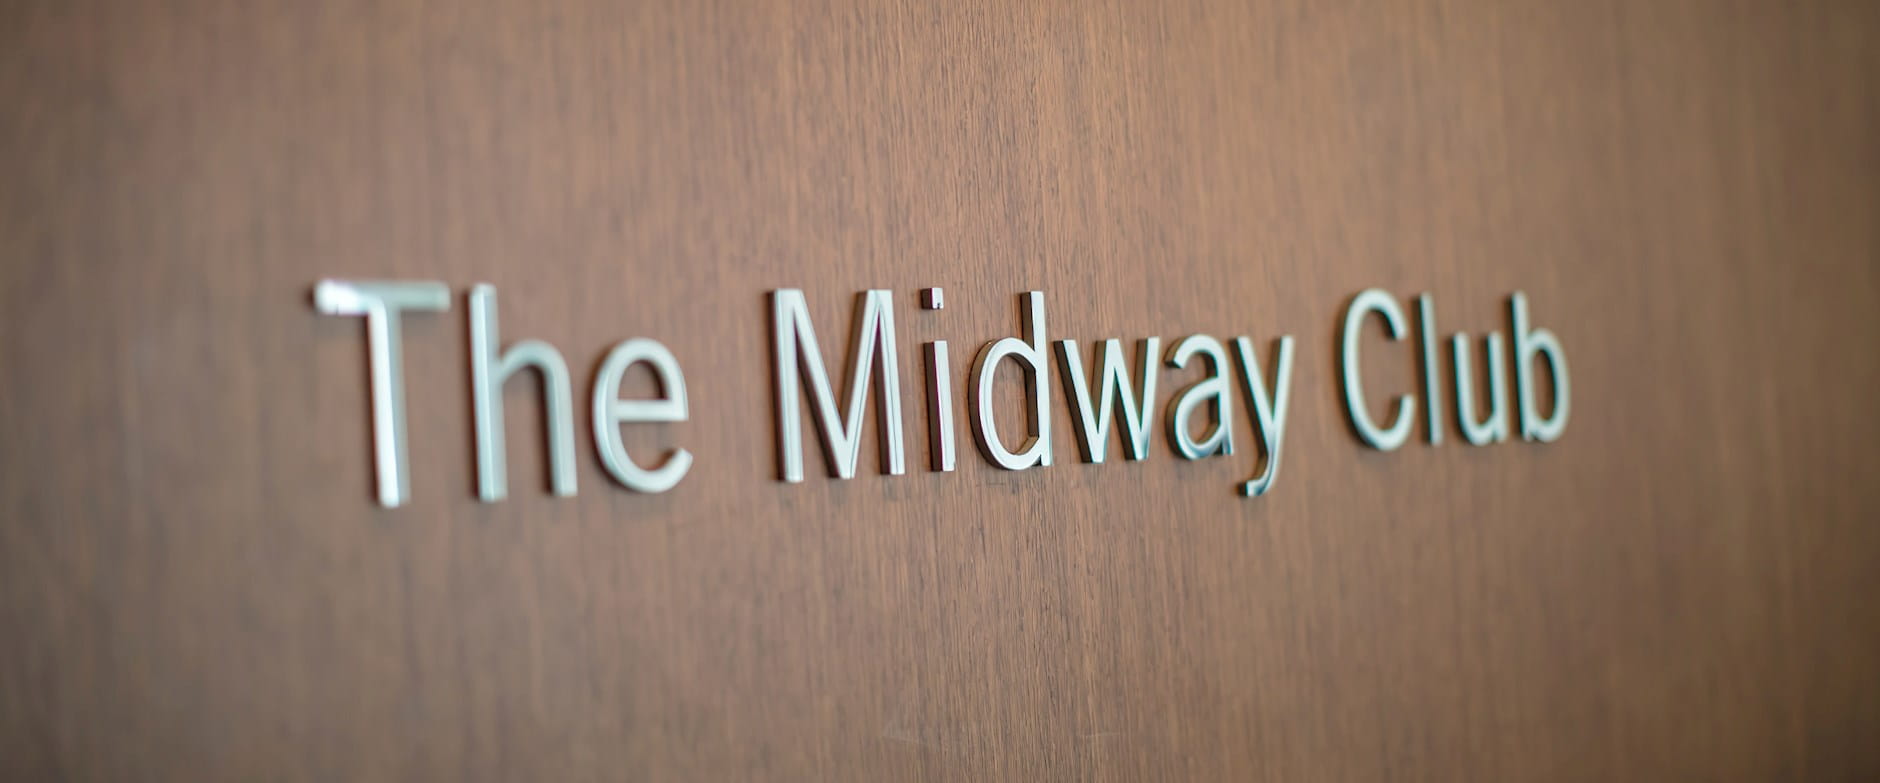 Metal signage which reads "The Midway Club" against dark panneled wood